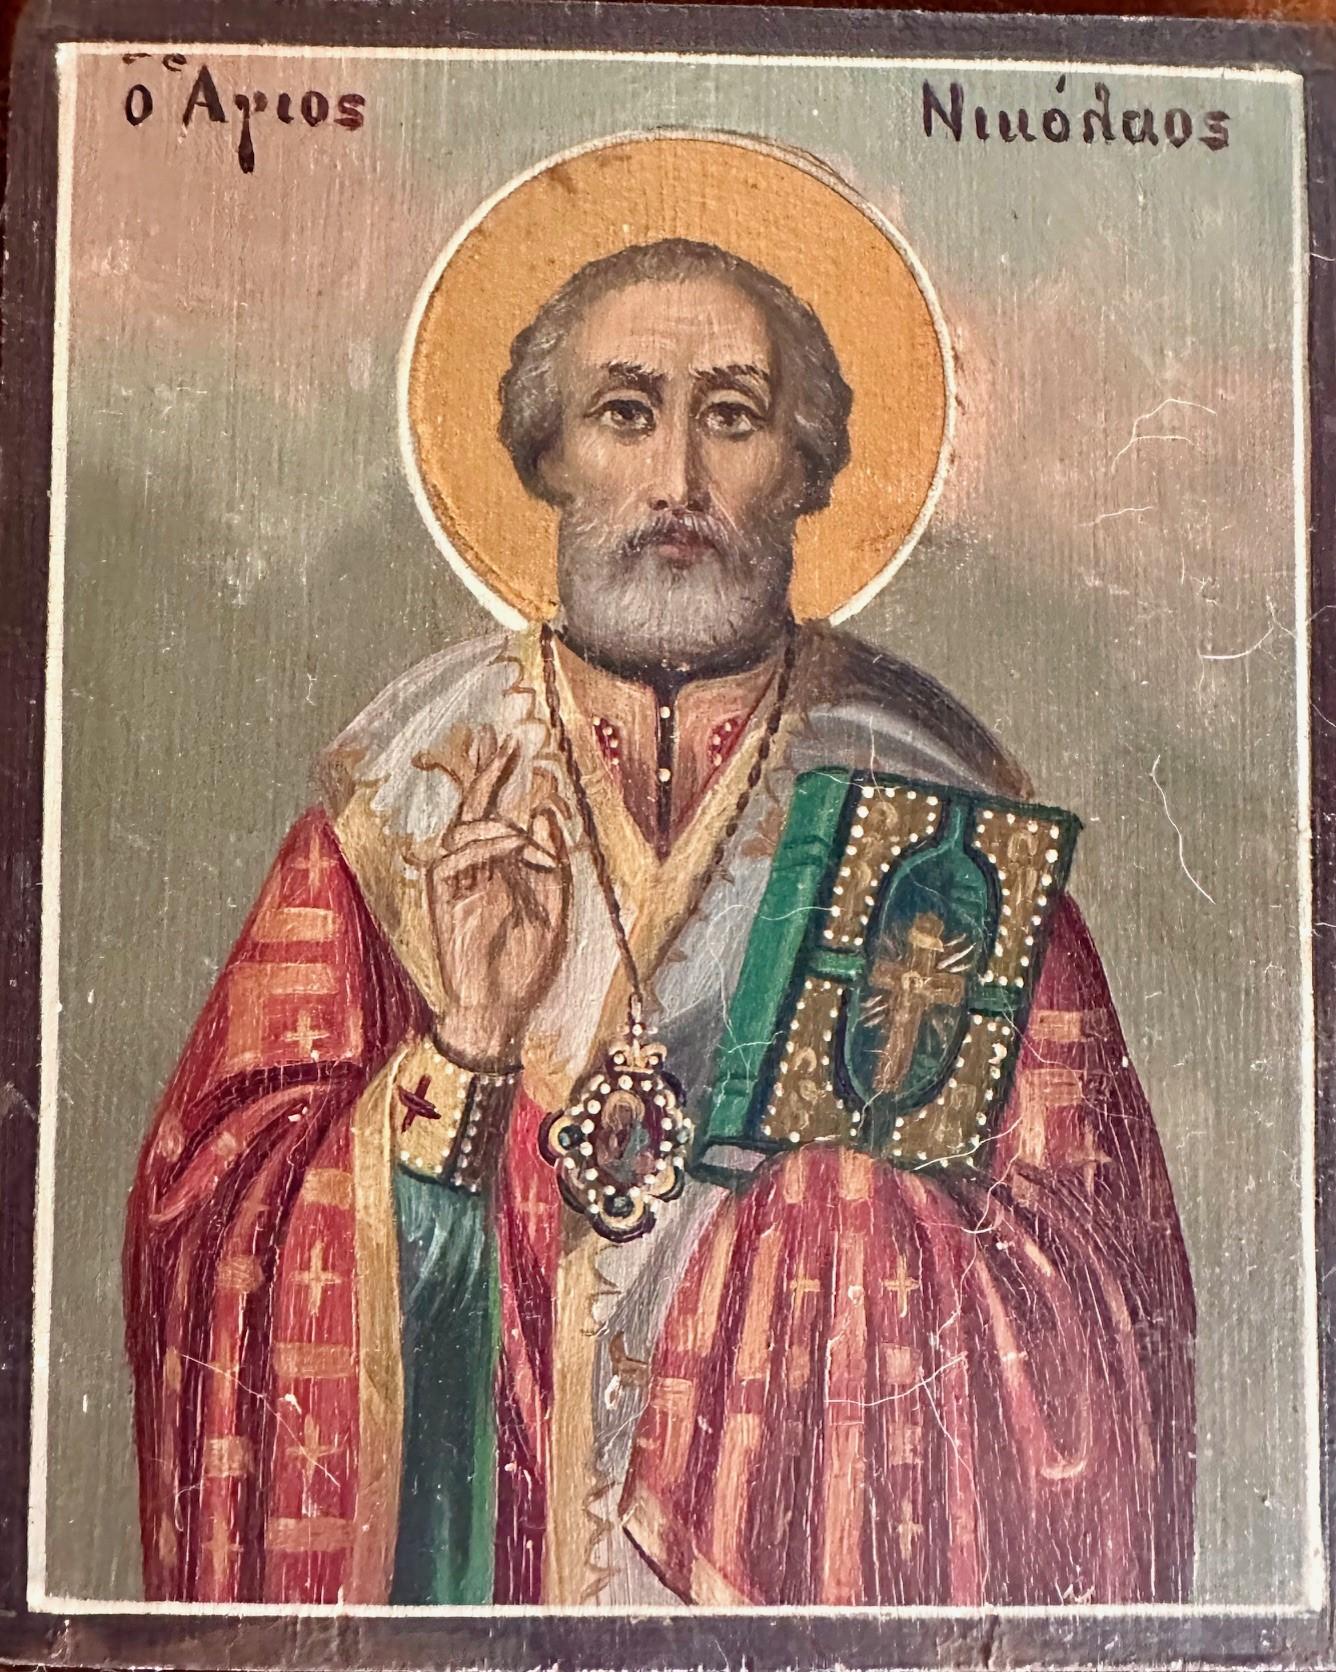 Vintage Hand Painted Saint Nicholas Icon Orthodox Church

The hand painted icon is mounted on velvet and framed in a beautiful Renaissance style wood frame.  The wood panel features St. Nicholas the Miracle Worker as he holds the compiled Gospels in